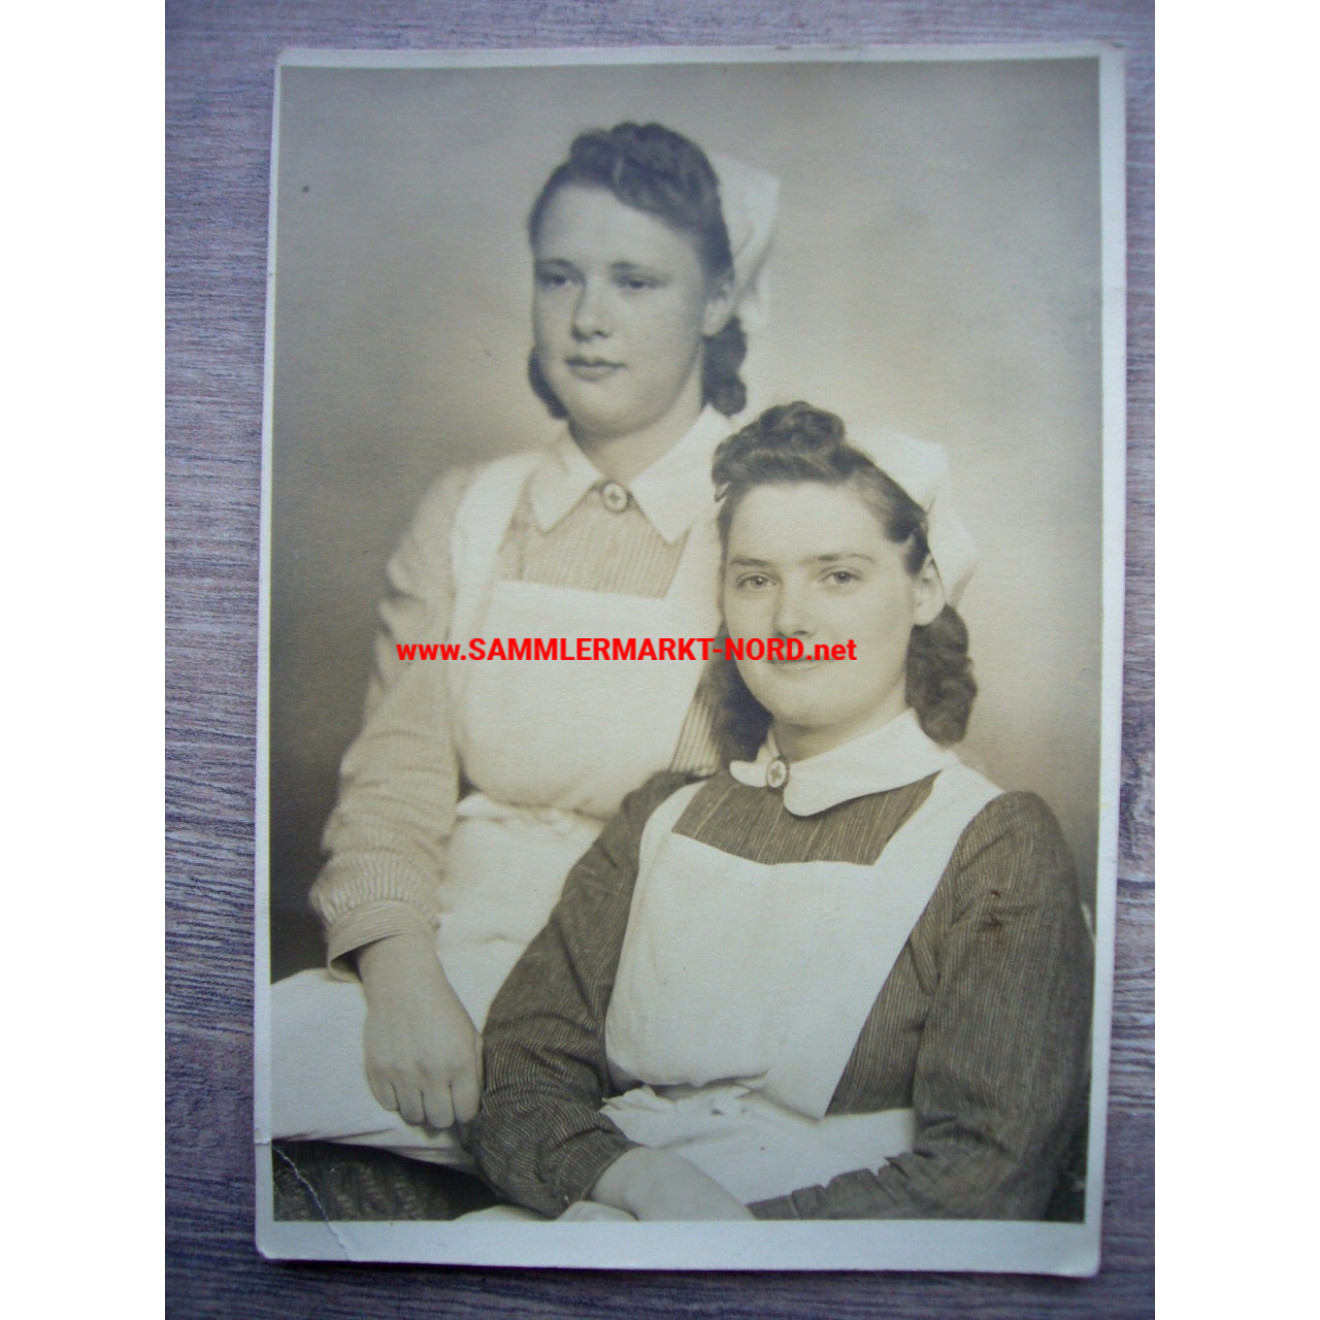 DRK Red Cross - two nurses with service brooches - Kiel